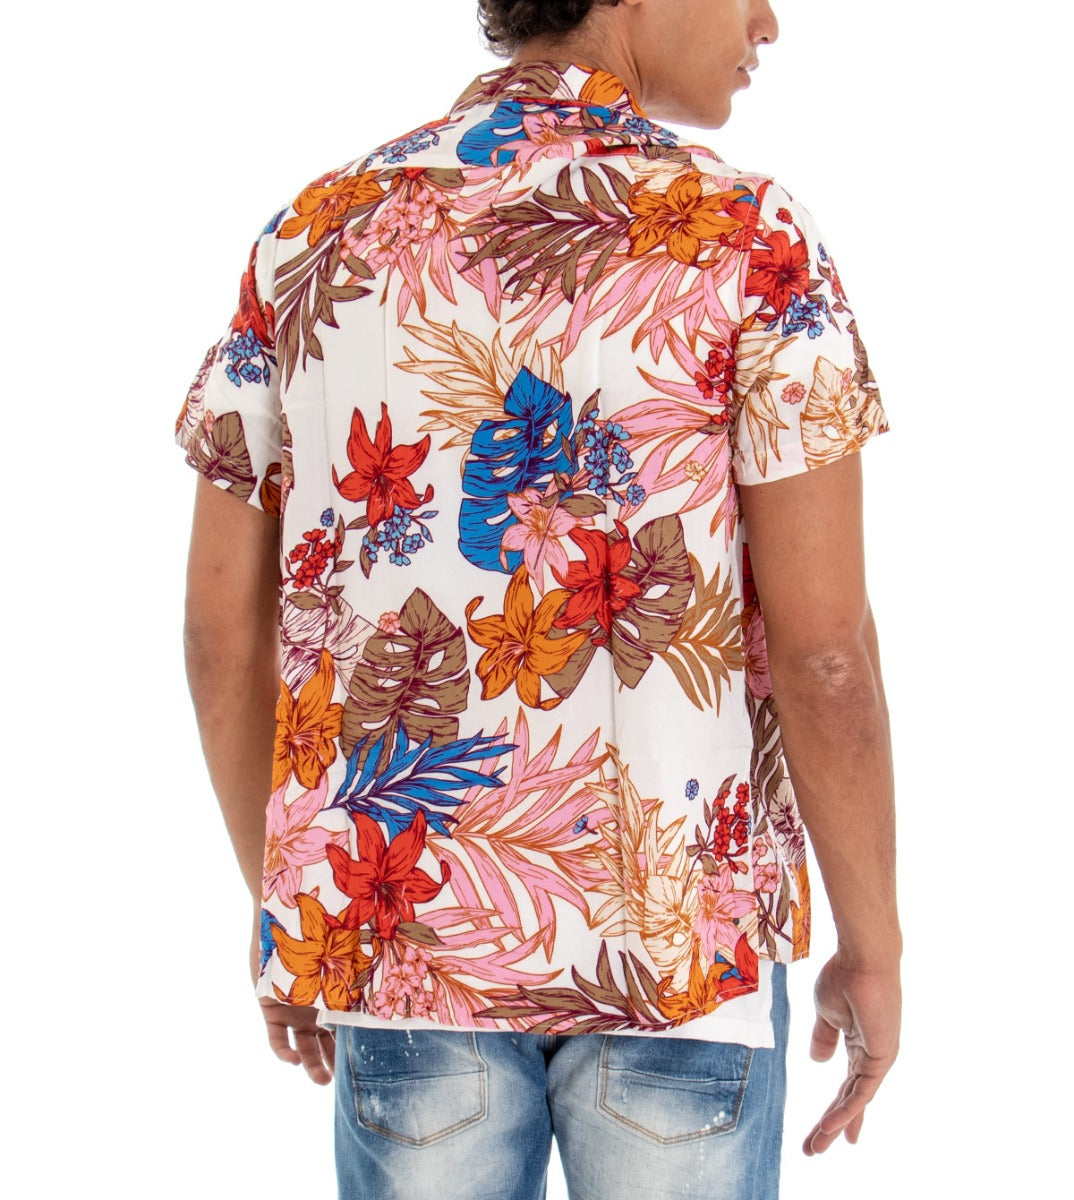 Men's Short Sleeve Shirt with Collar Multicolored Floral Pattern White GIOSAL-CC1109A